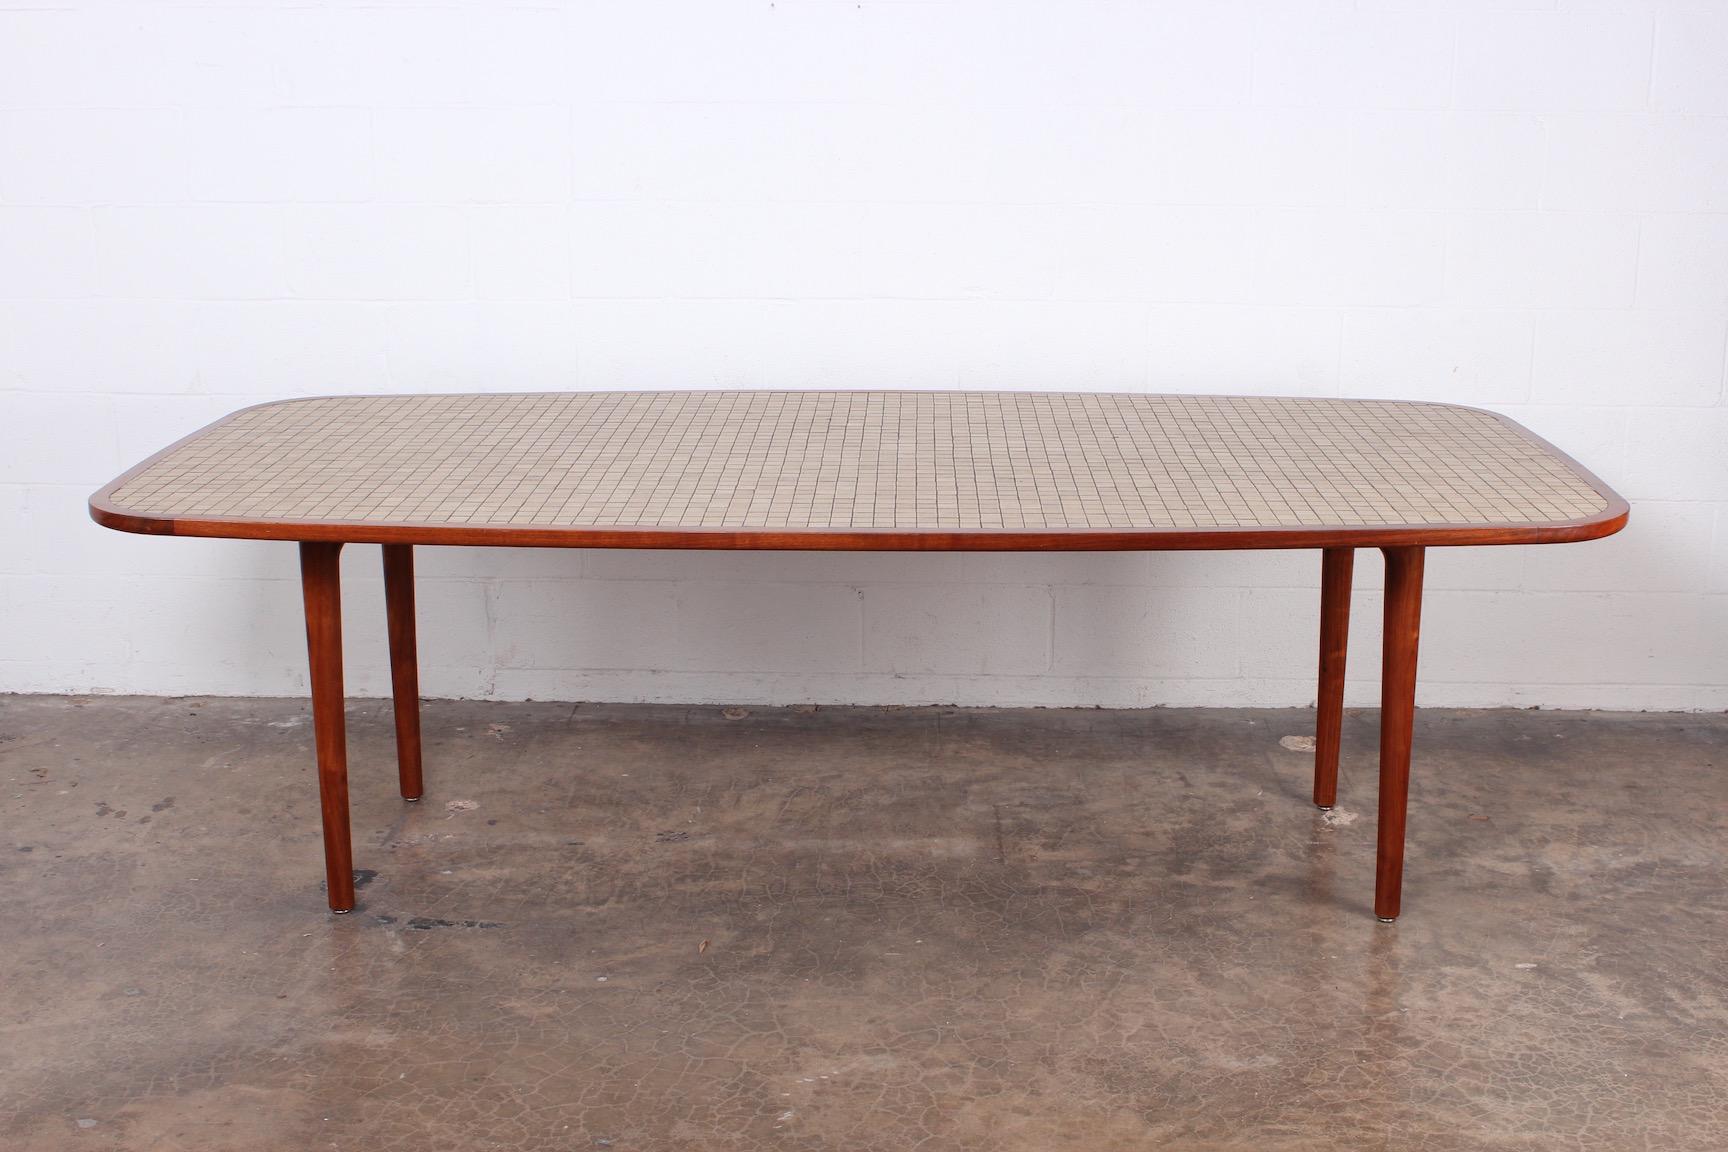 A large walnut dining table with ceramic tile-top by Gordon and Jane Martz for Marshall Studios.